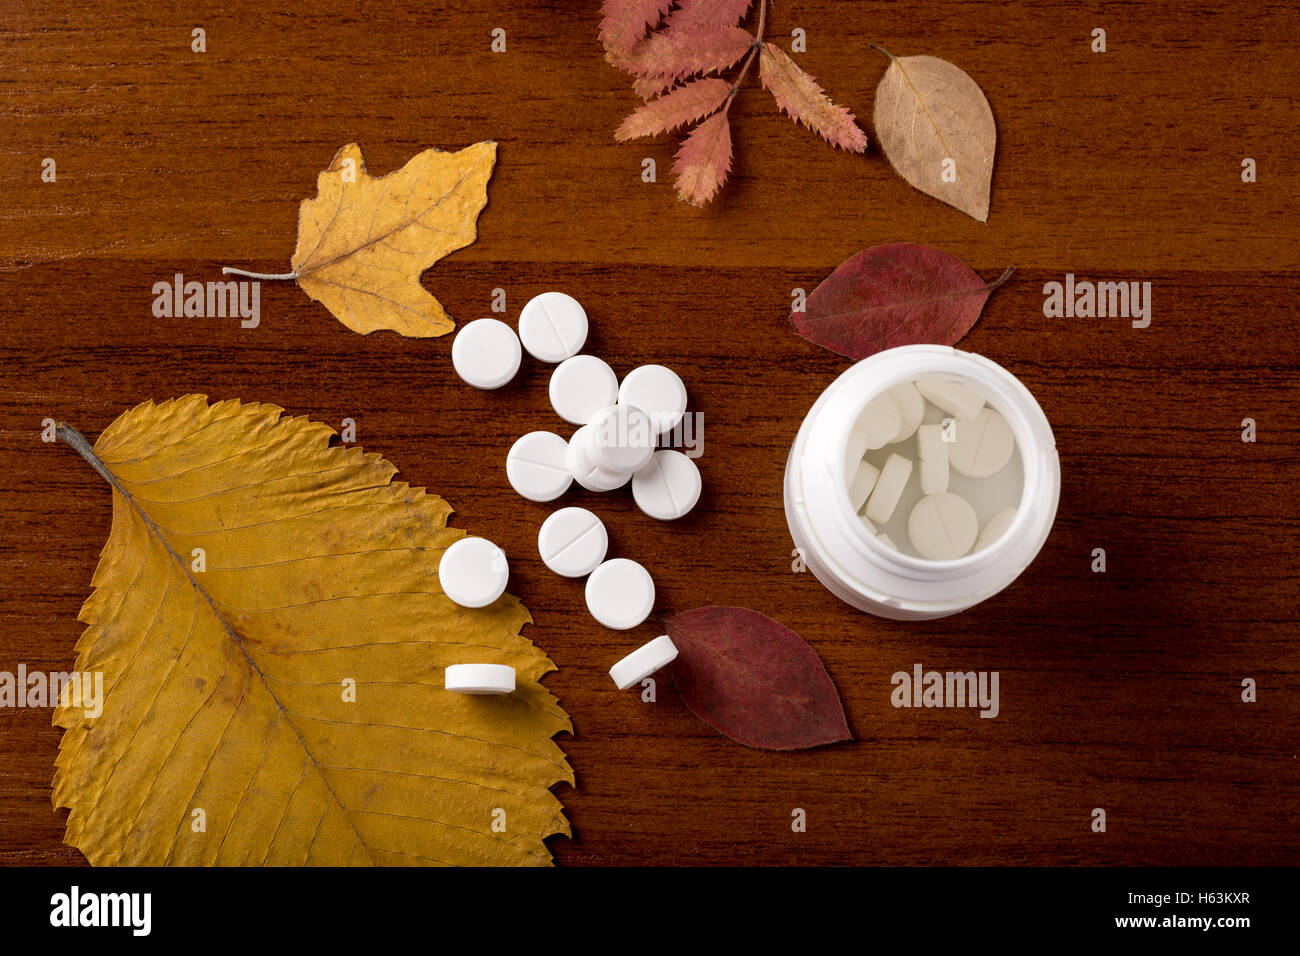 Heap of round white pills and pill bottle Stock Photo